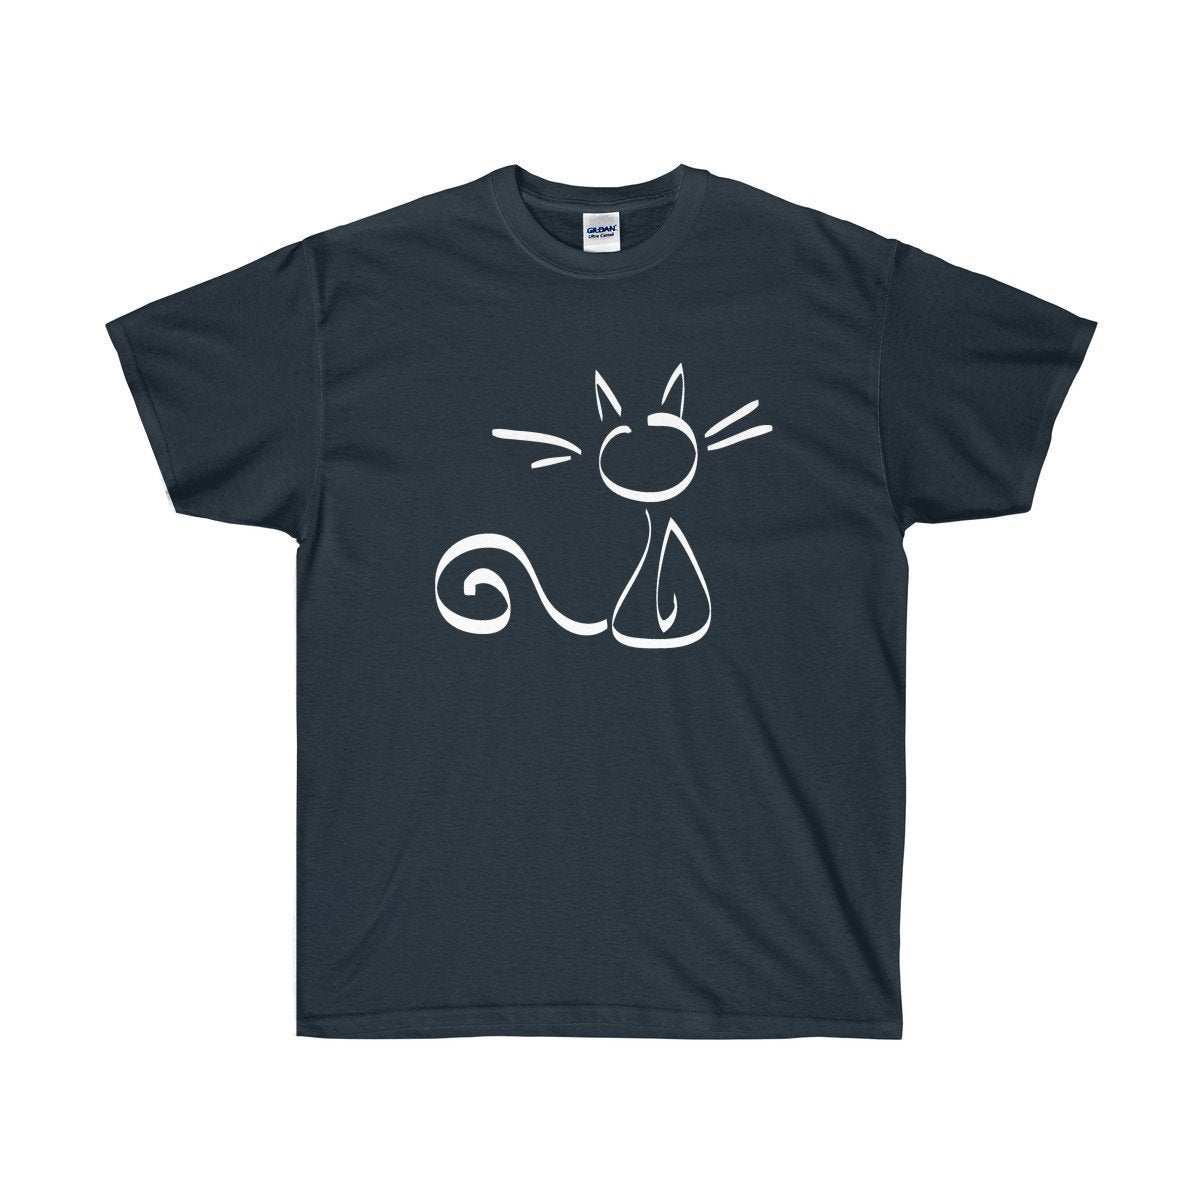 Cat Themed Gifts for Men, Cat Tee Shirt Featuring a White Cat Silhouette